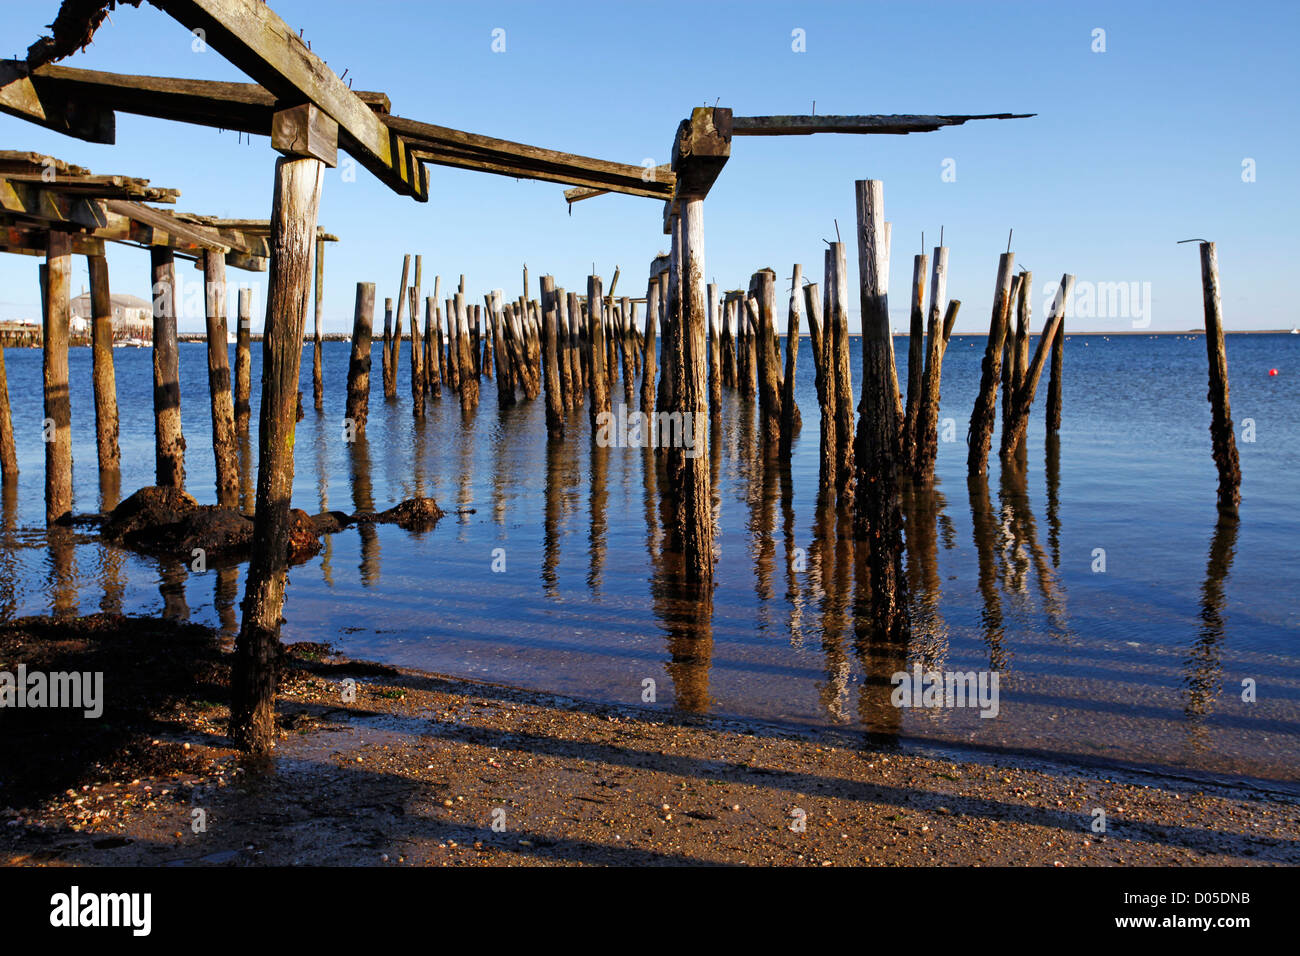 Old wooden pilings on the beach, Provincetown, Cape Cod, Massachusetts, America Stock Photo